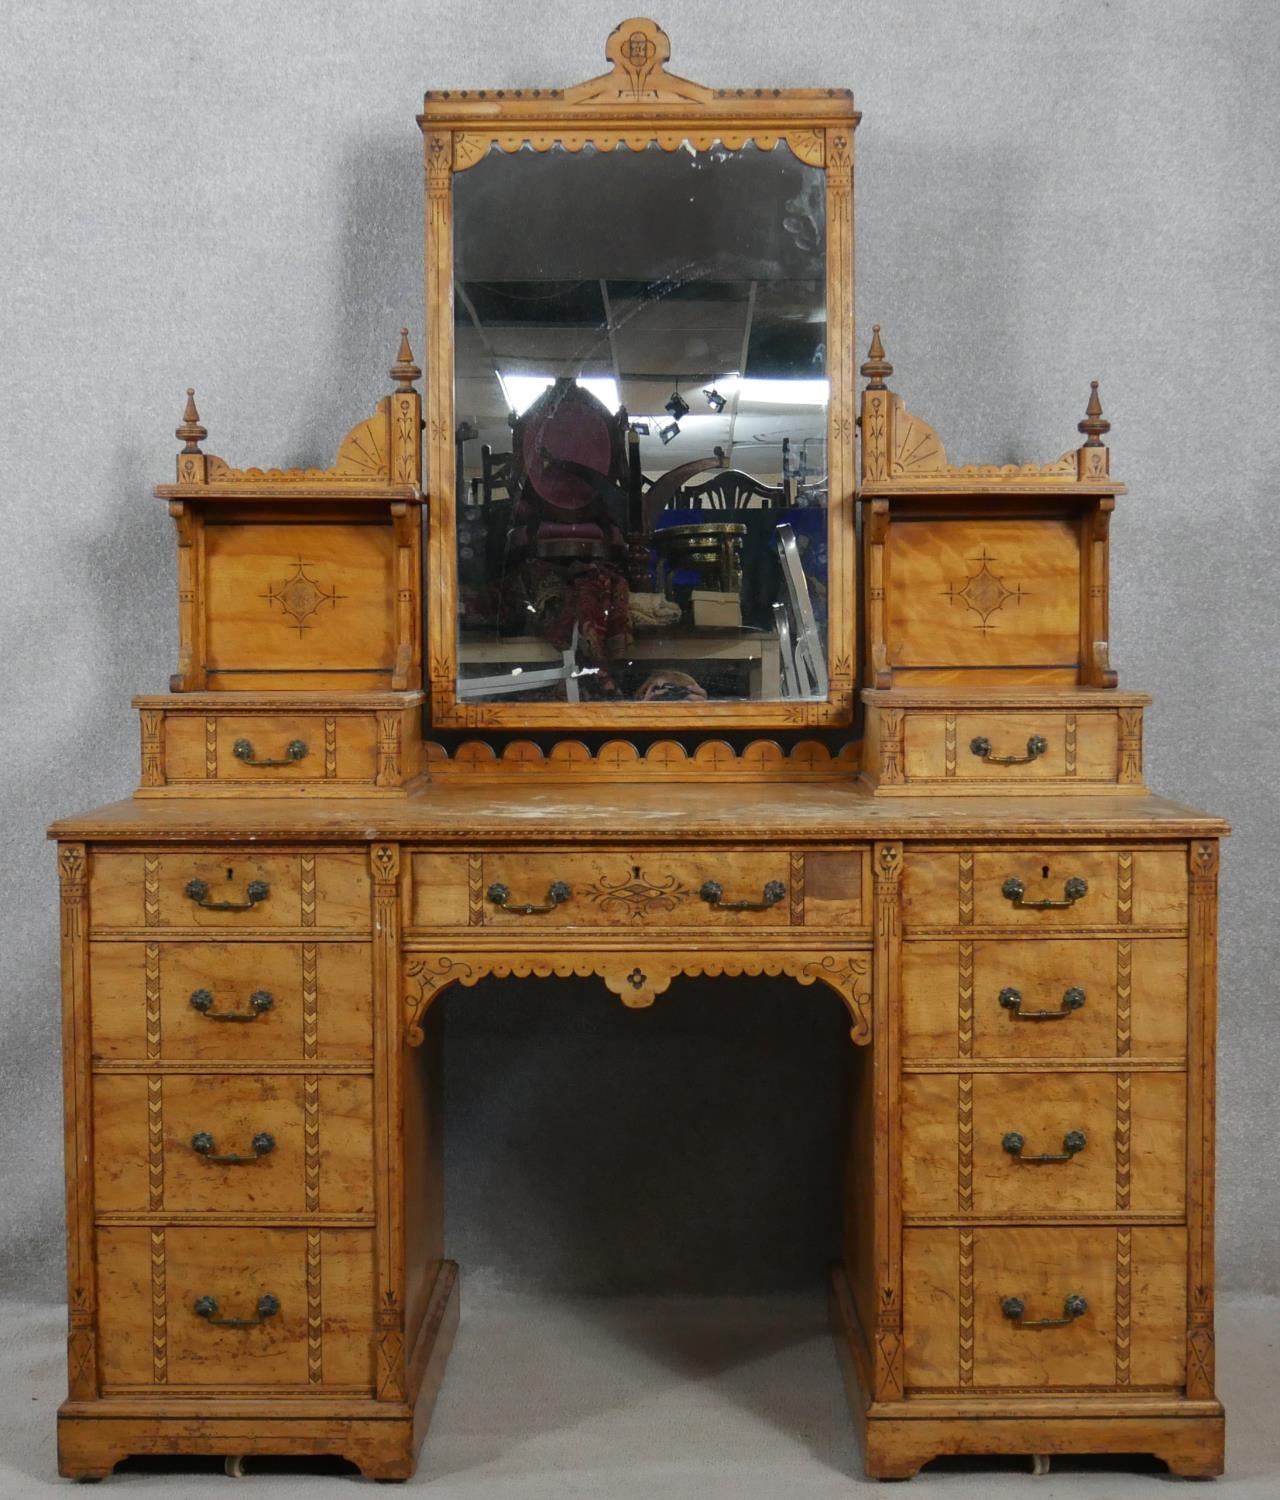 A late 19th century Aesthetic style walnut dressing table with incised carved decoration and ebony